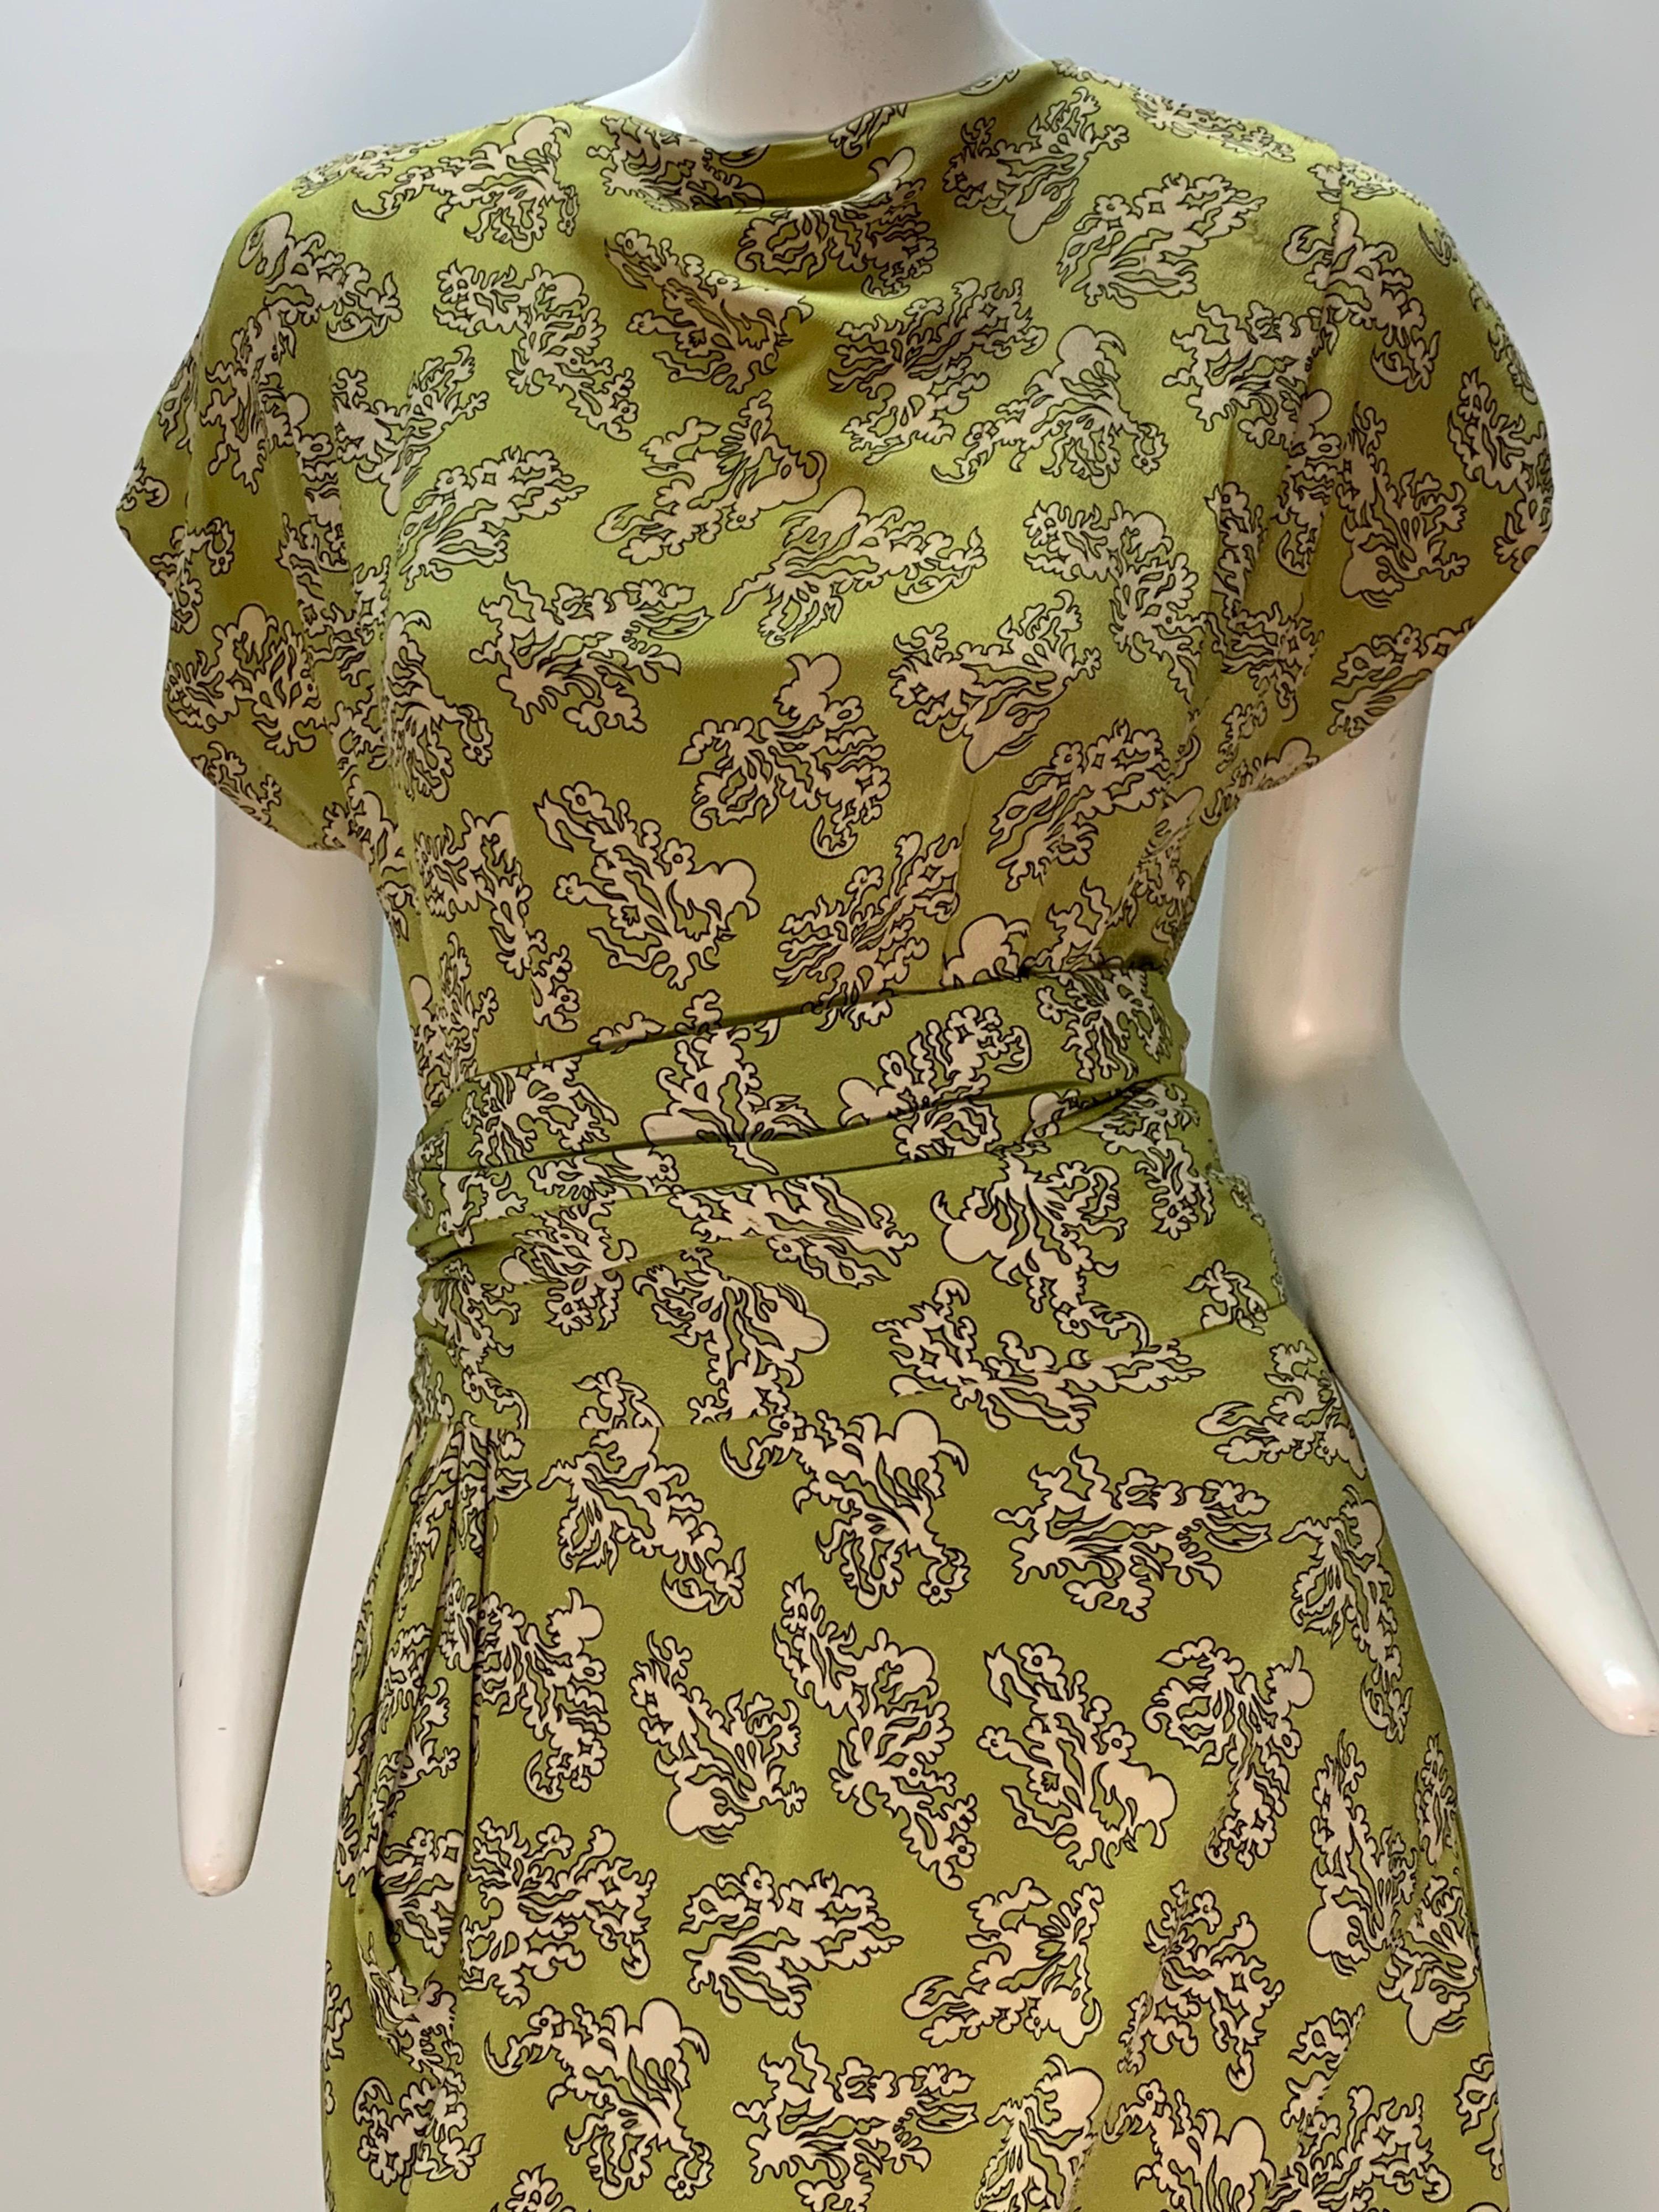 1940s Chartreuse Rayon Crepe Print Swing Dress w/ Draped Hip & Cummerbund Waist In Excellent Condition For Sale In Gresham, OR